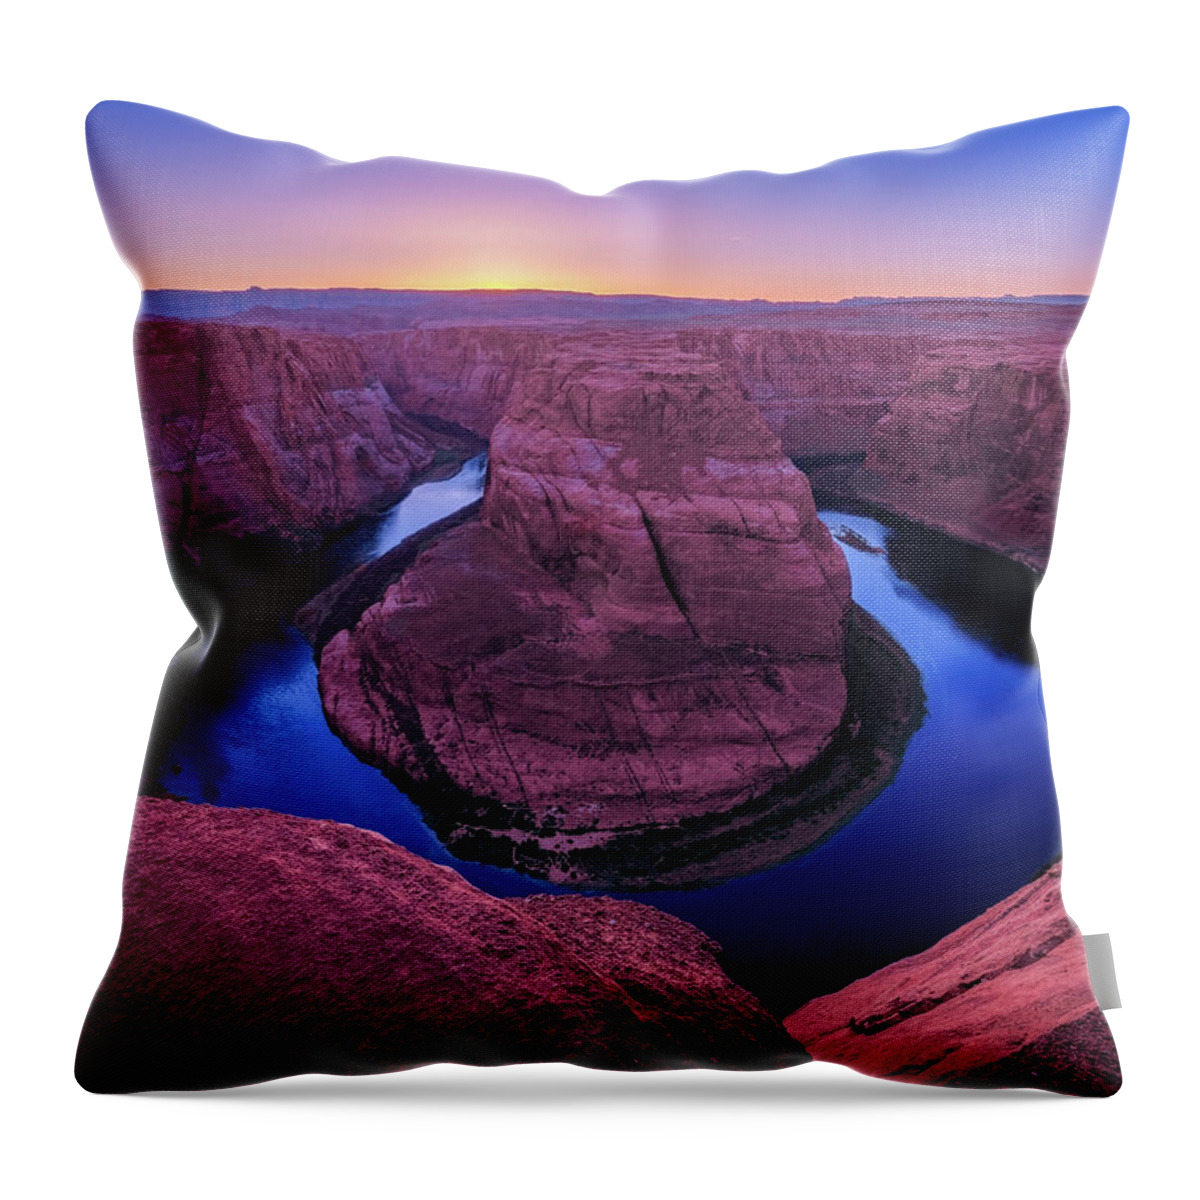 2018 Throw Pillow featuring the photograph Horseshoe Bend by Edgars Erglis